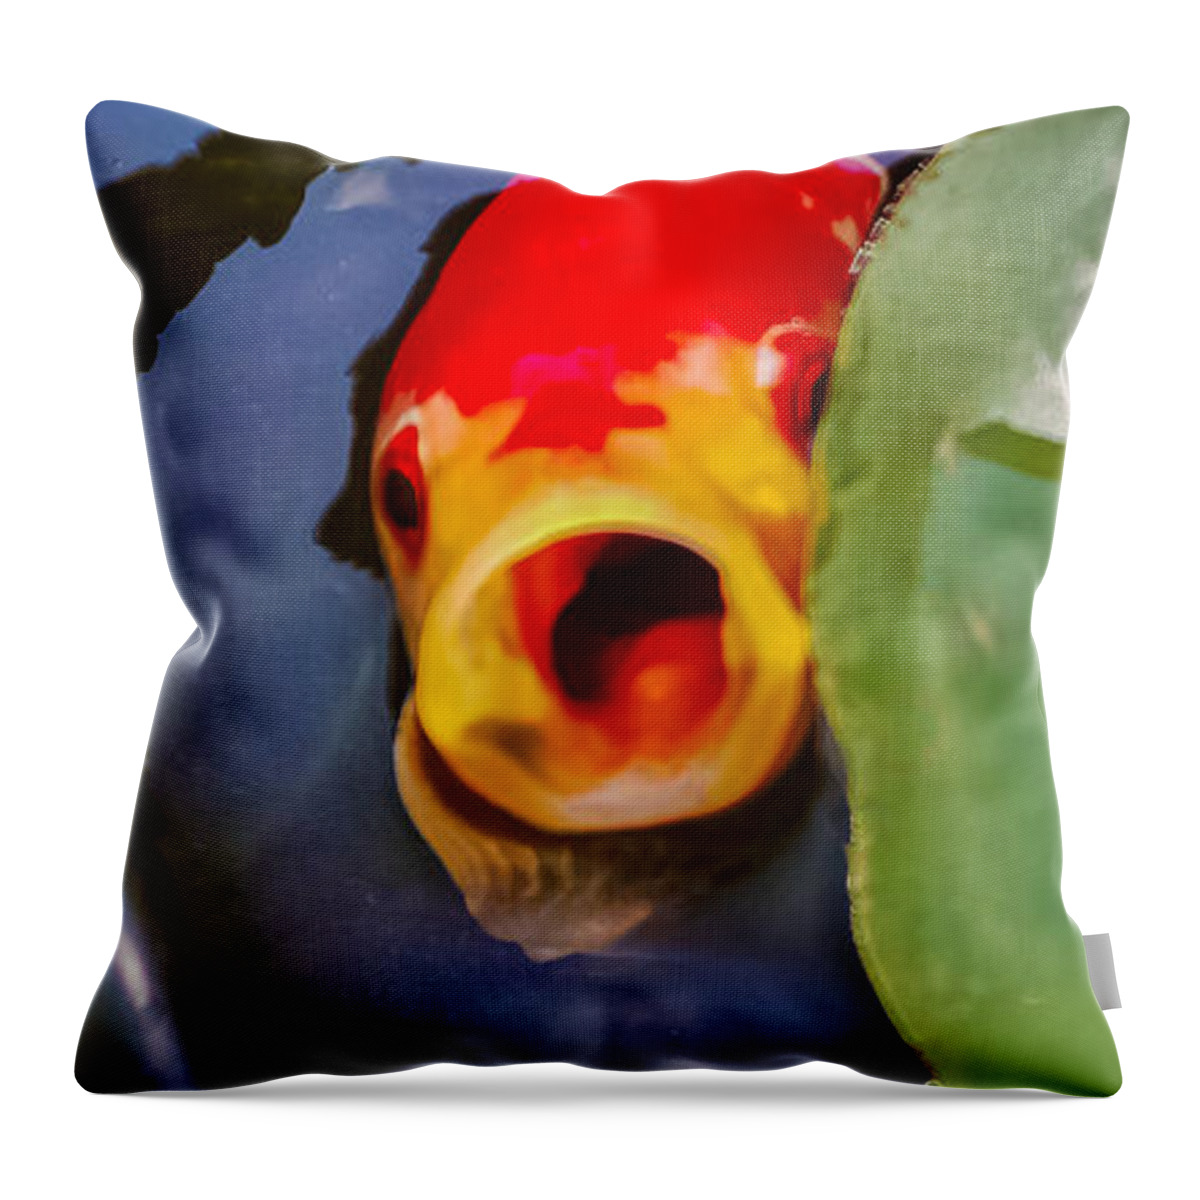 Koi Throw Pillow featuring the photograph Koi by Charlie Cliques